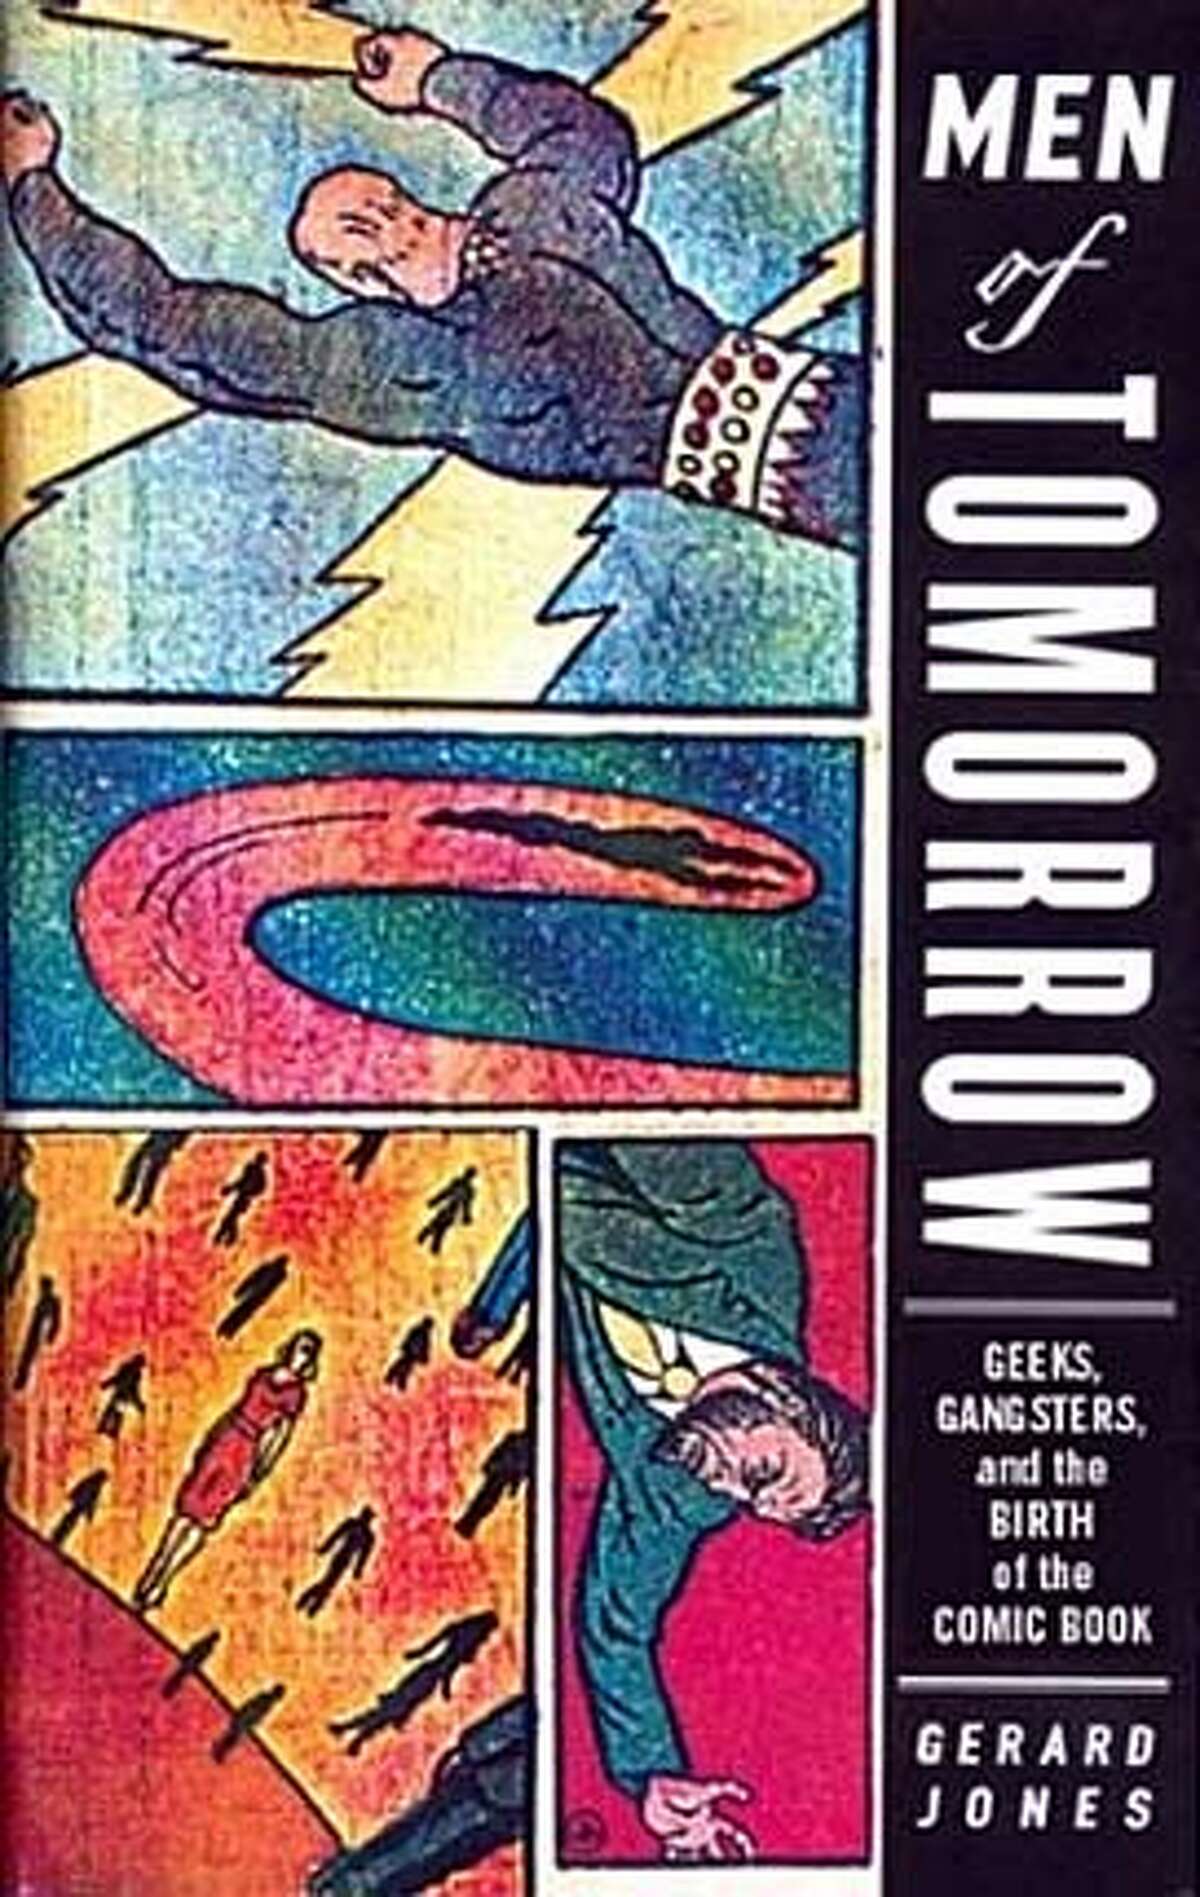 "Men of Tomorrow: Geeks, Gangsters and the Birth of the Comic Book" by Gerard Jones